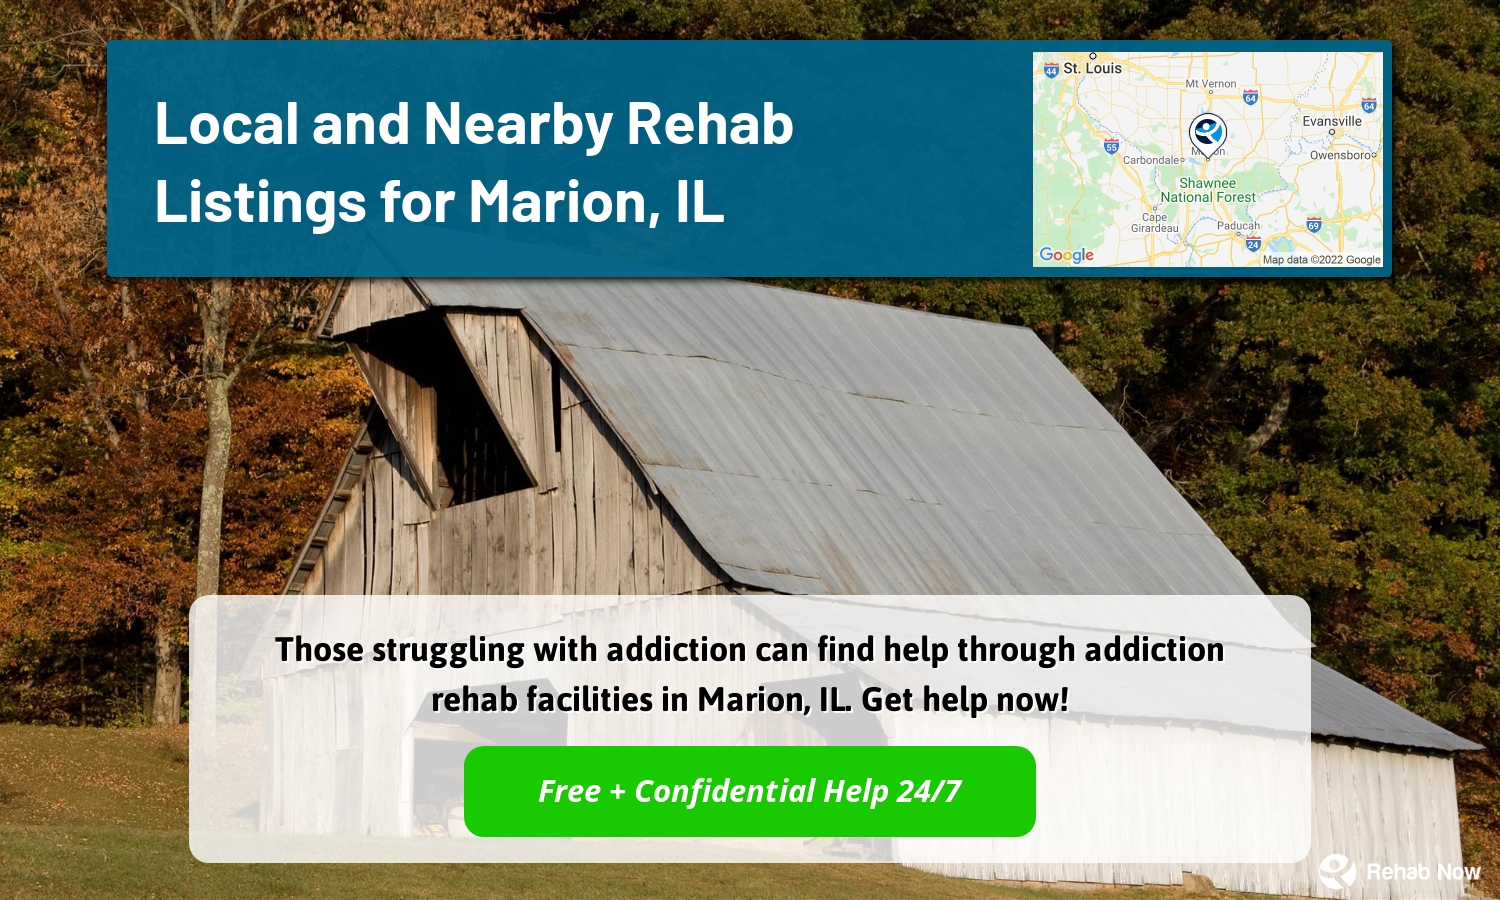 Those struggling with addiction can find help through addiction rehab facilities in Marion, IL. Get help now!